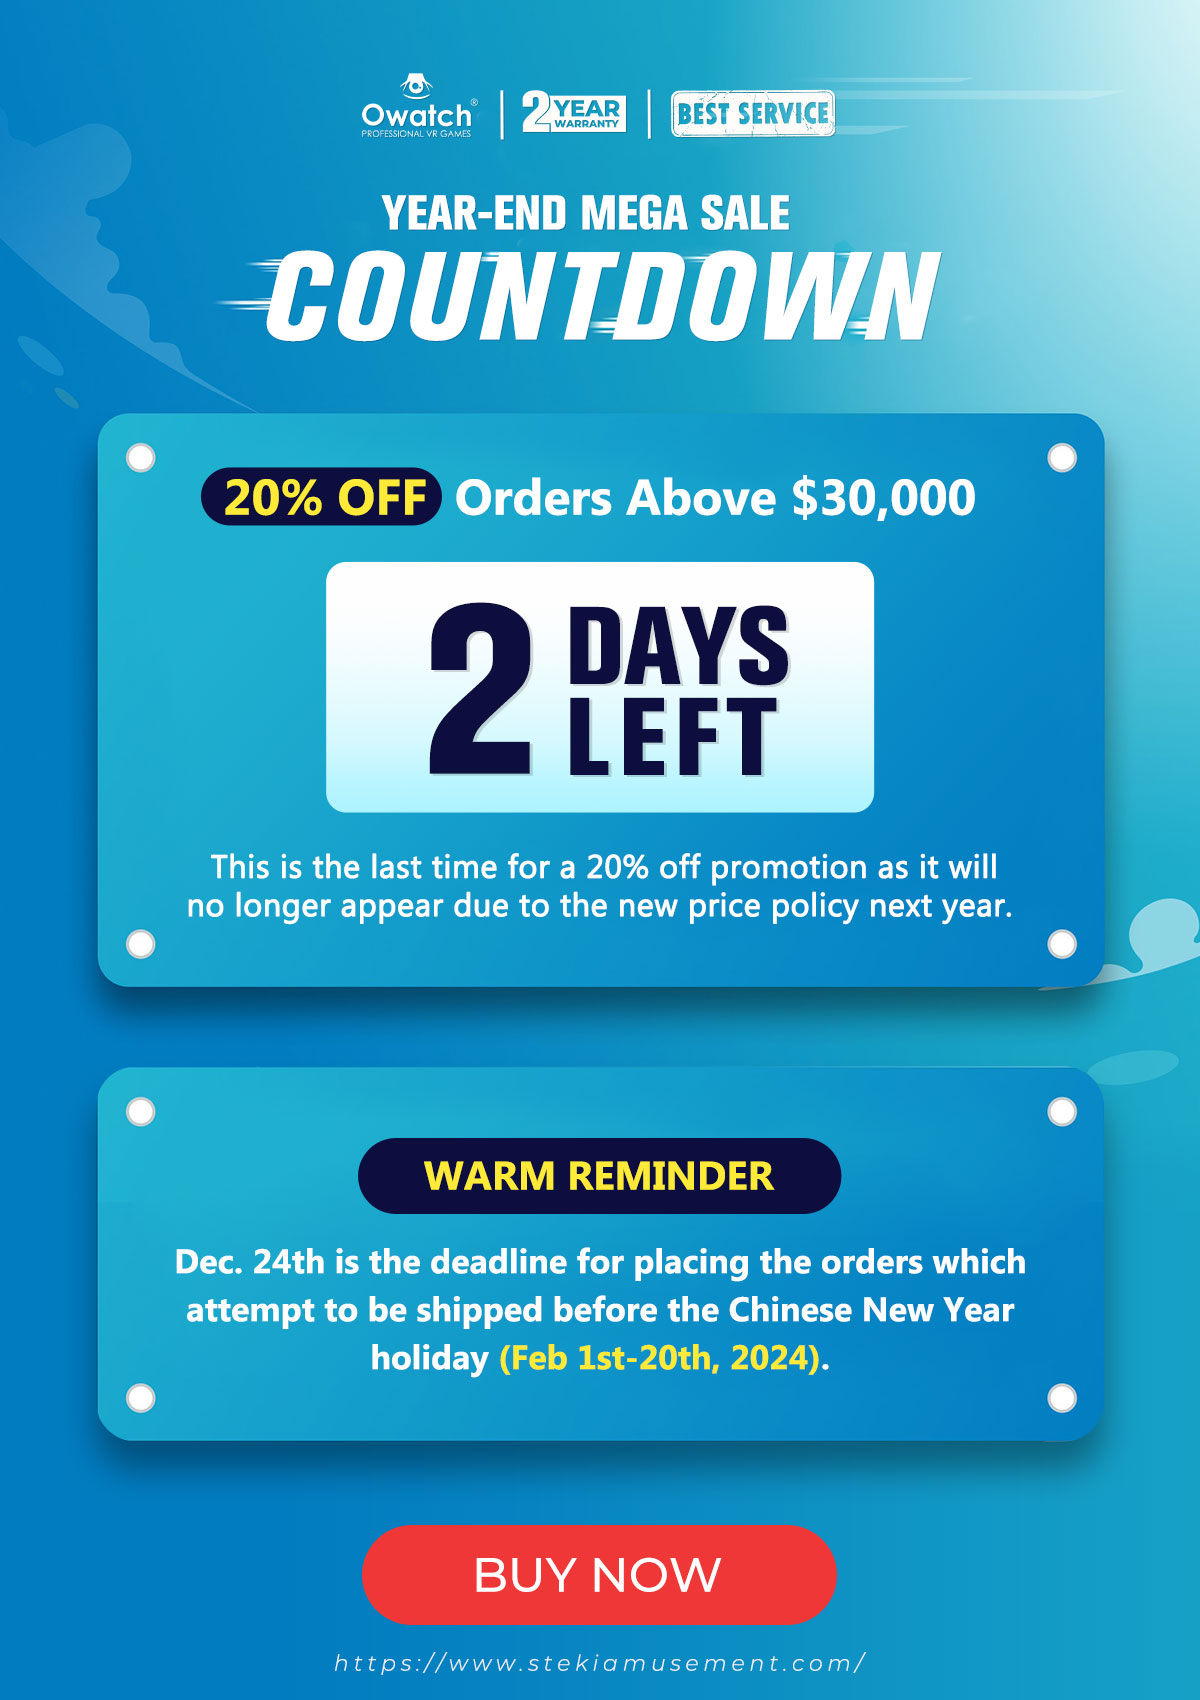 2 Days Countdown to the 2023 Year-end Mega Sale